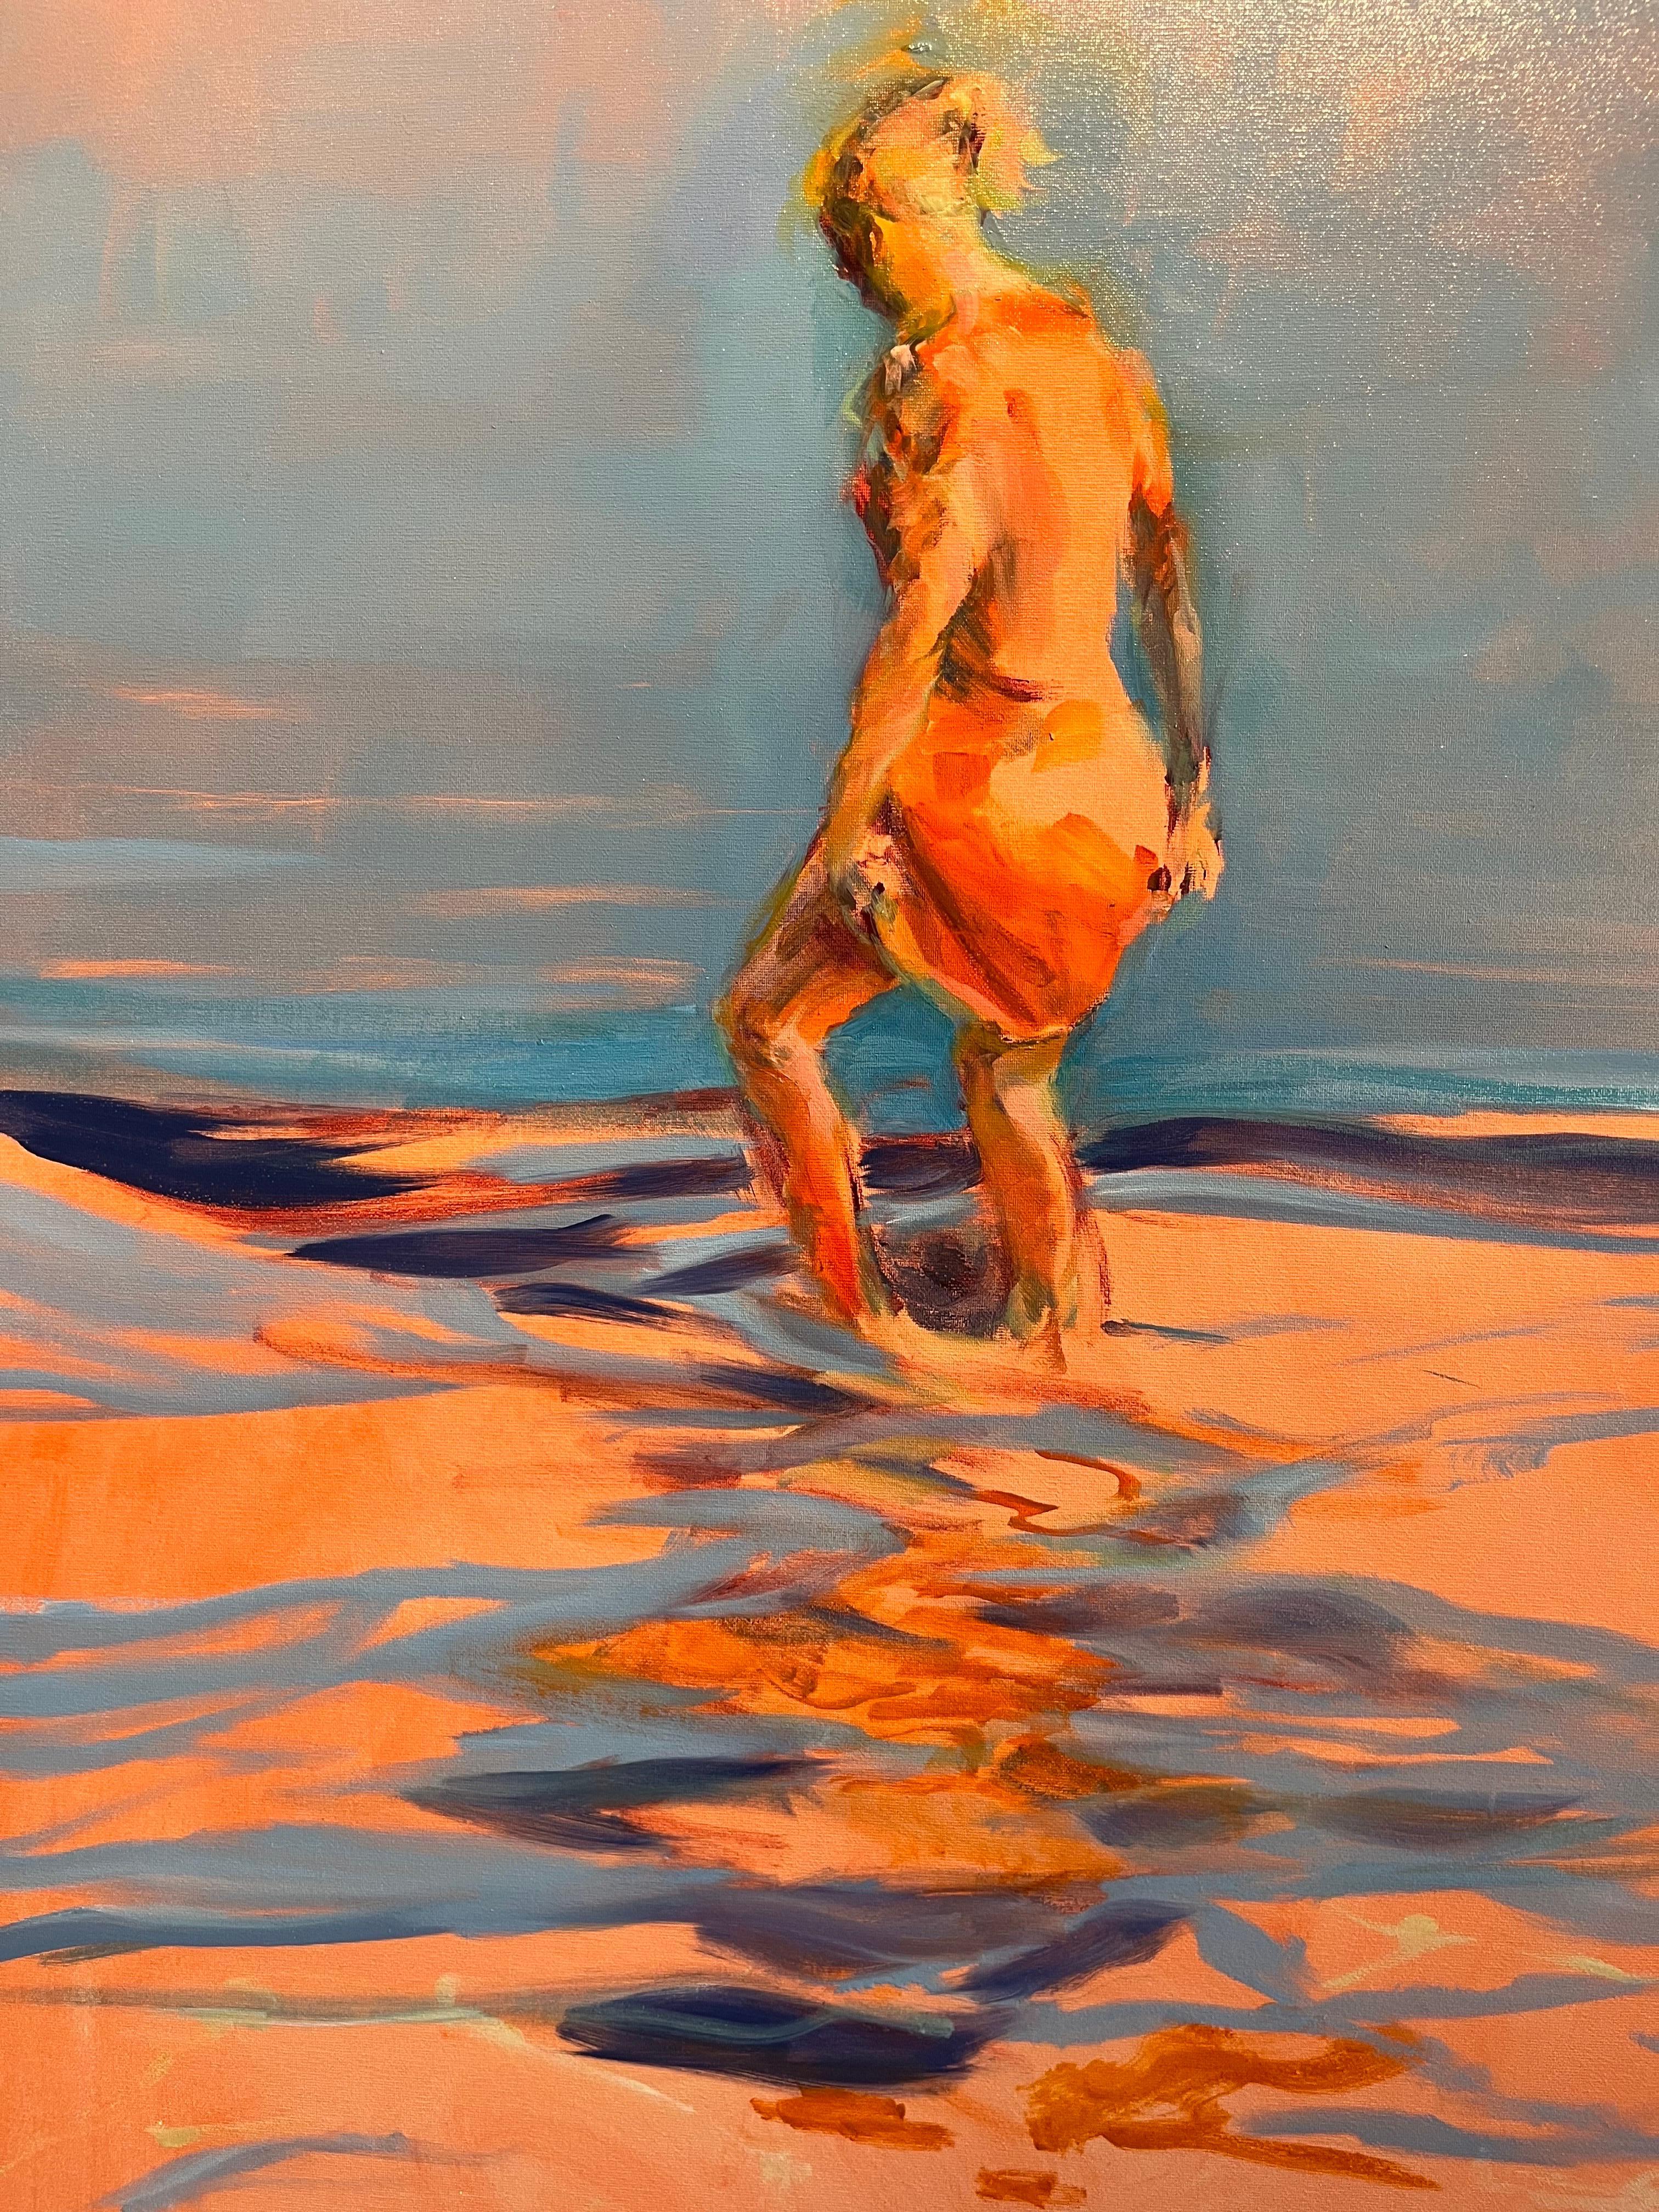 Woman walk in the water at low tide, sunset colors, orange pinks, turquoise sky

Birgitte LYKKE MADSEN (Odense, Denmark, 1960)

1981-86, Educated from the Academy of Fine Arts, Odense
First solo exhibition in 1983

Artist statement:

“I am a